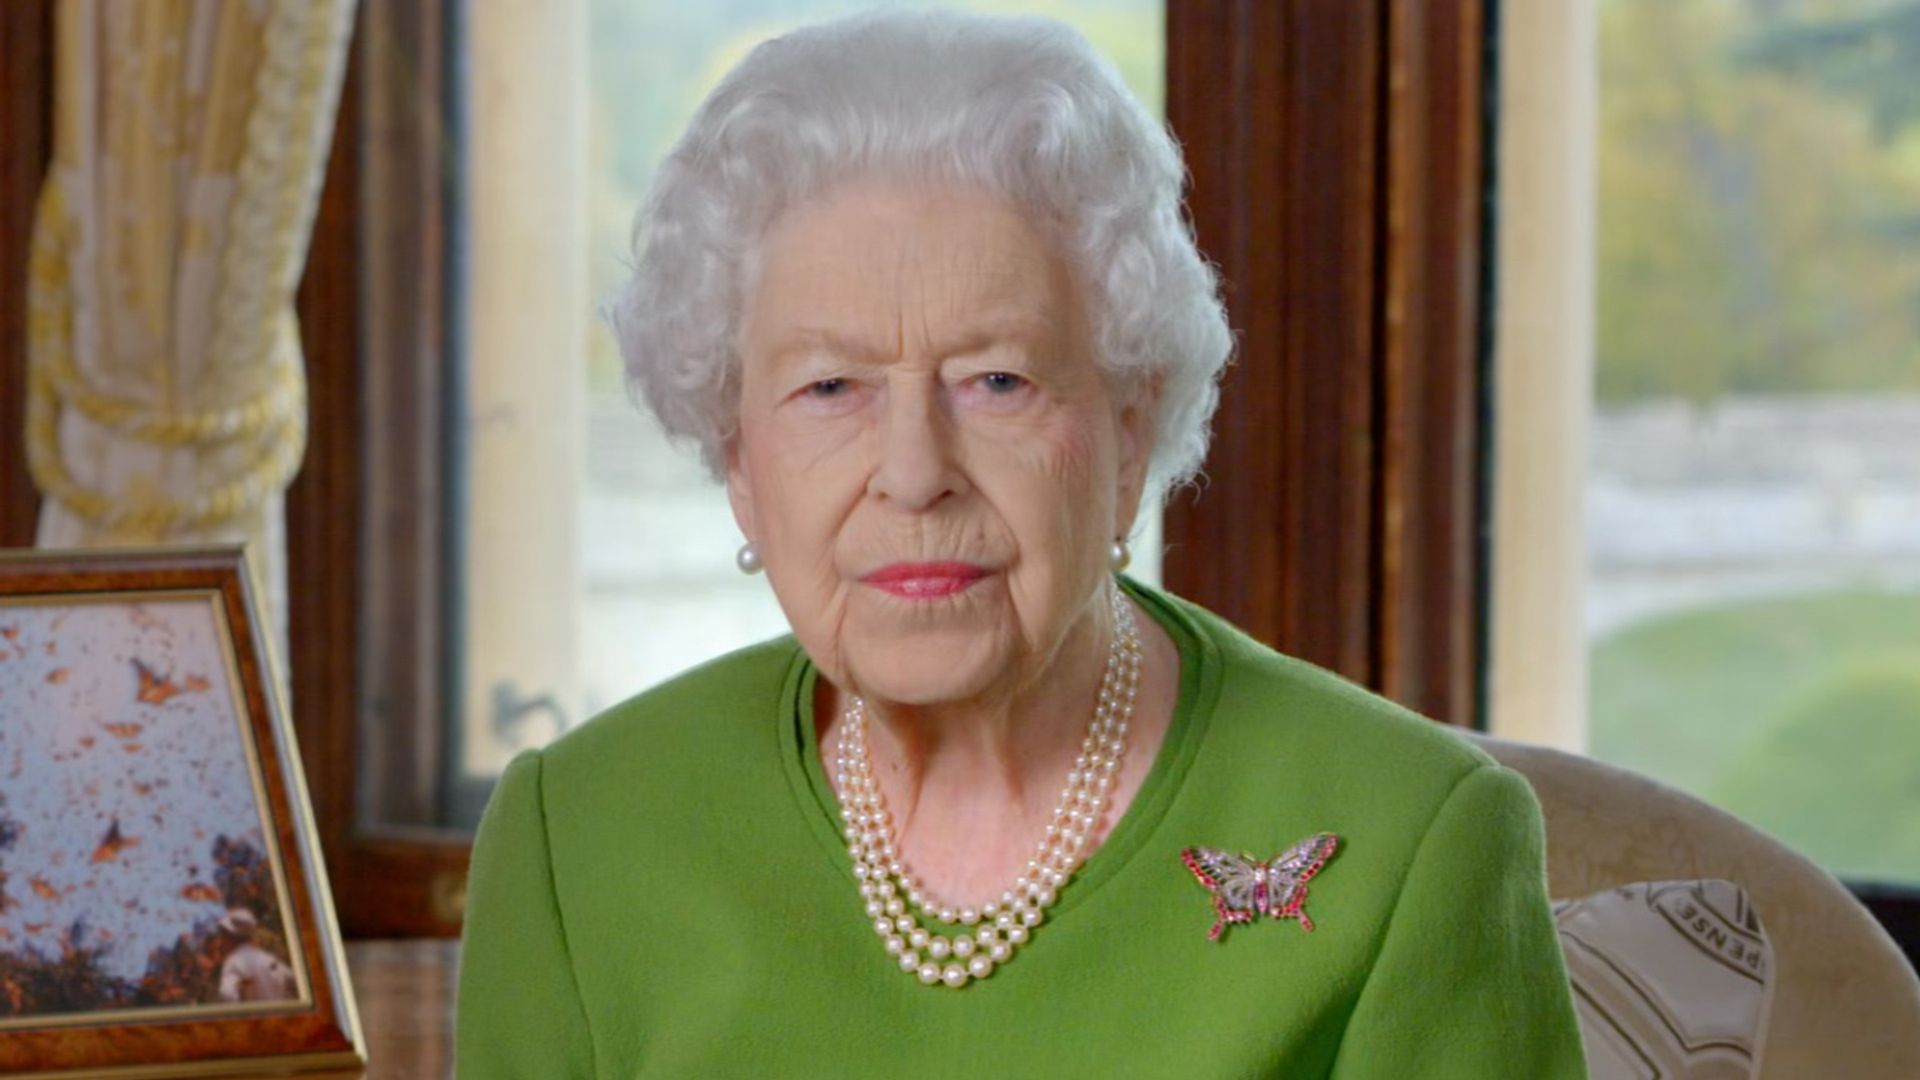 Confirmed: The Queen will not attend Easter Sunday church service